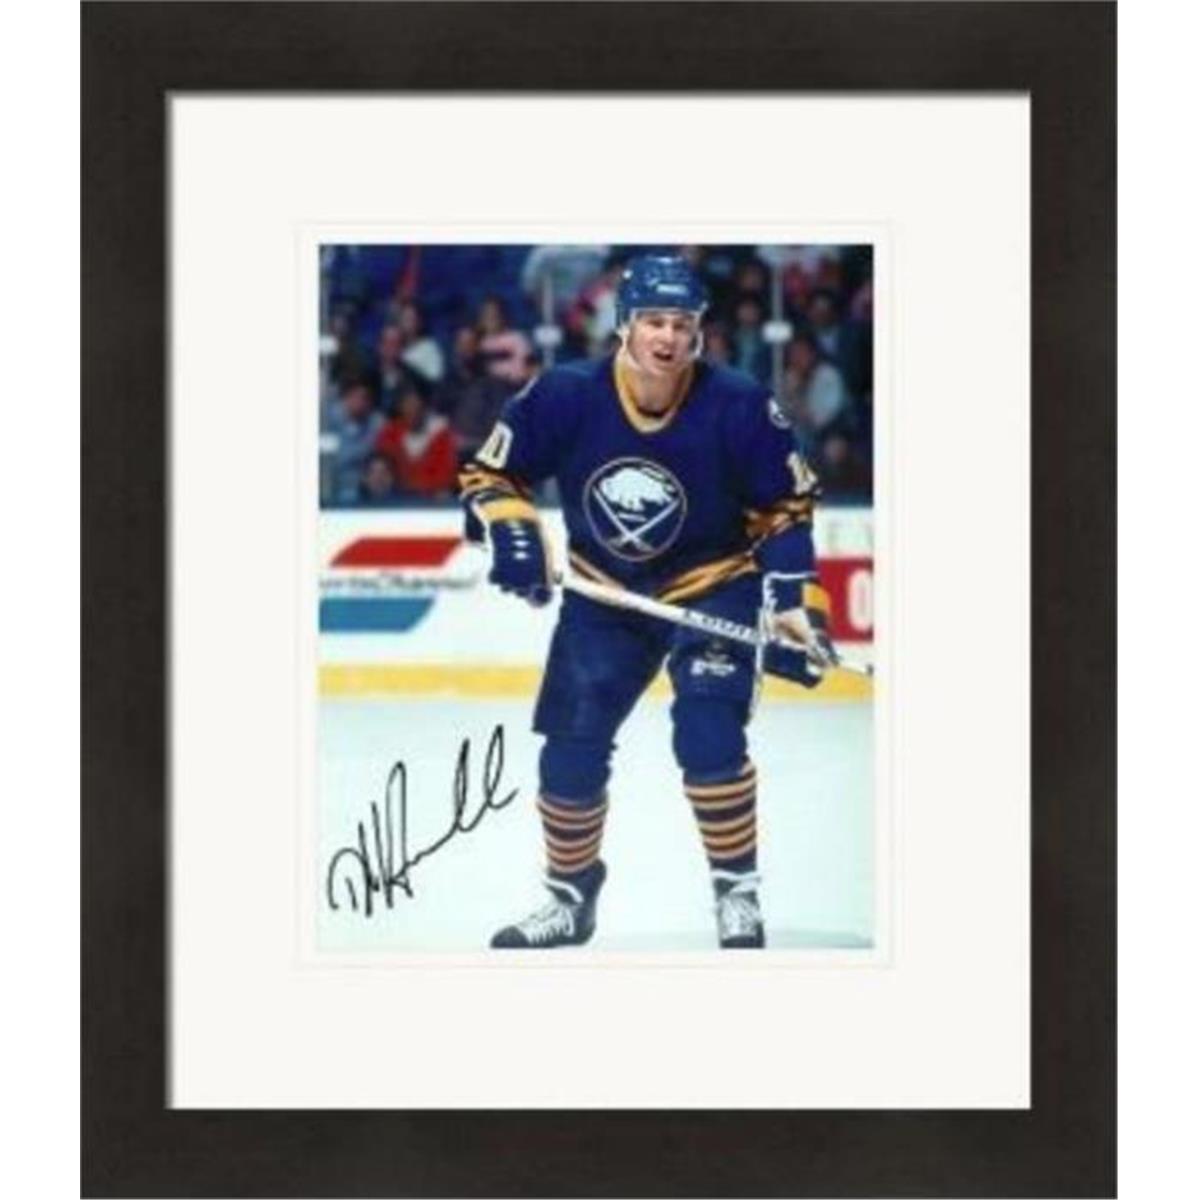 Picture of Autograph Warehouse 408965 8 x 10 in. Dale Hawerchuk Autographed Photo - 1 Matted & Framed